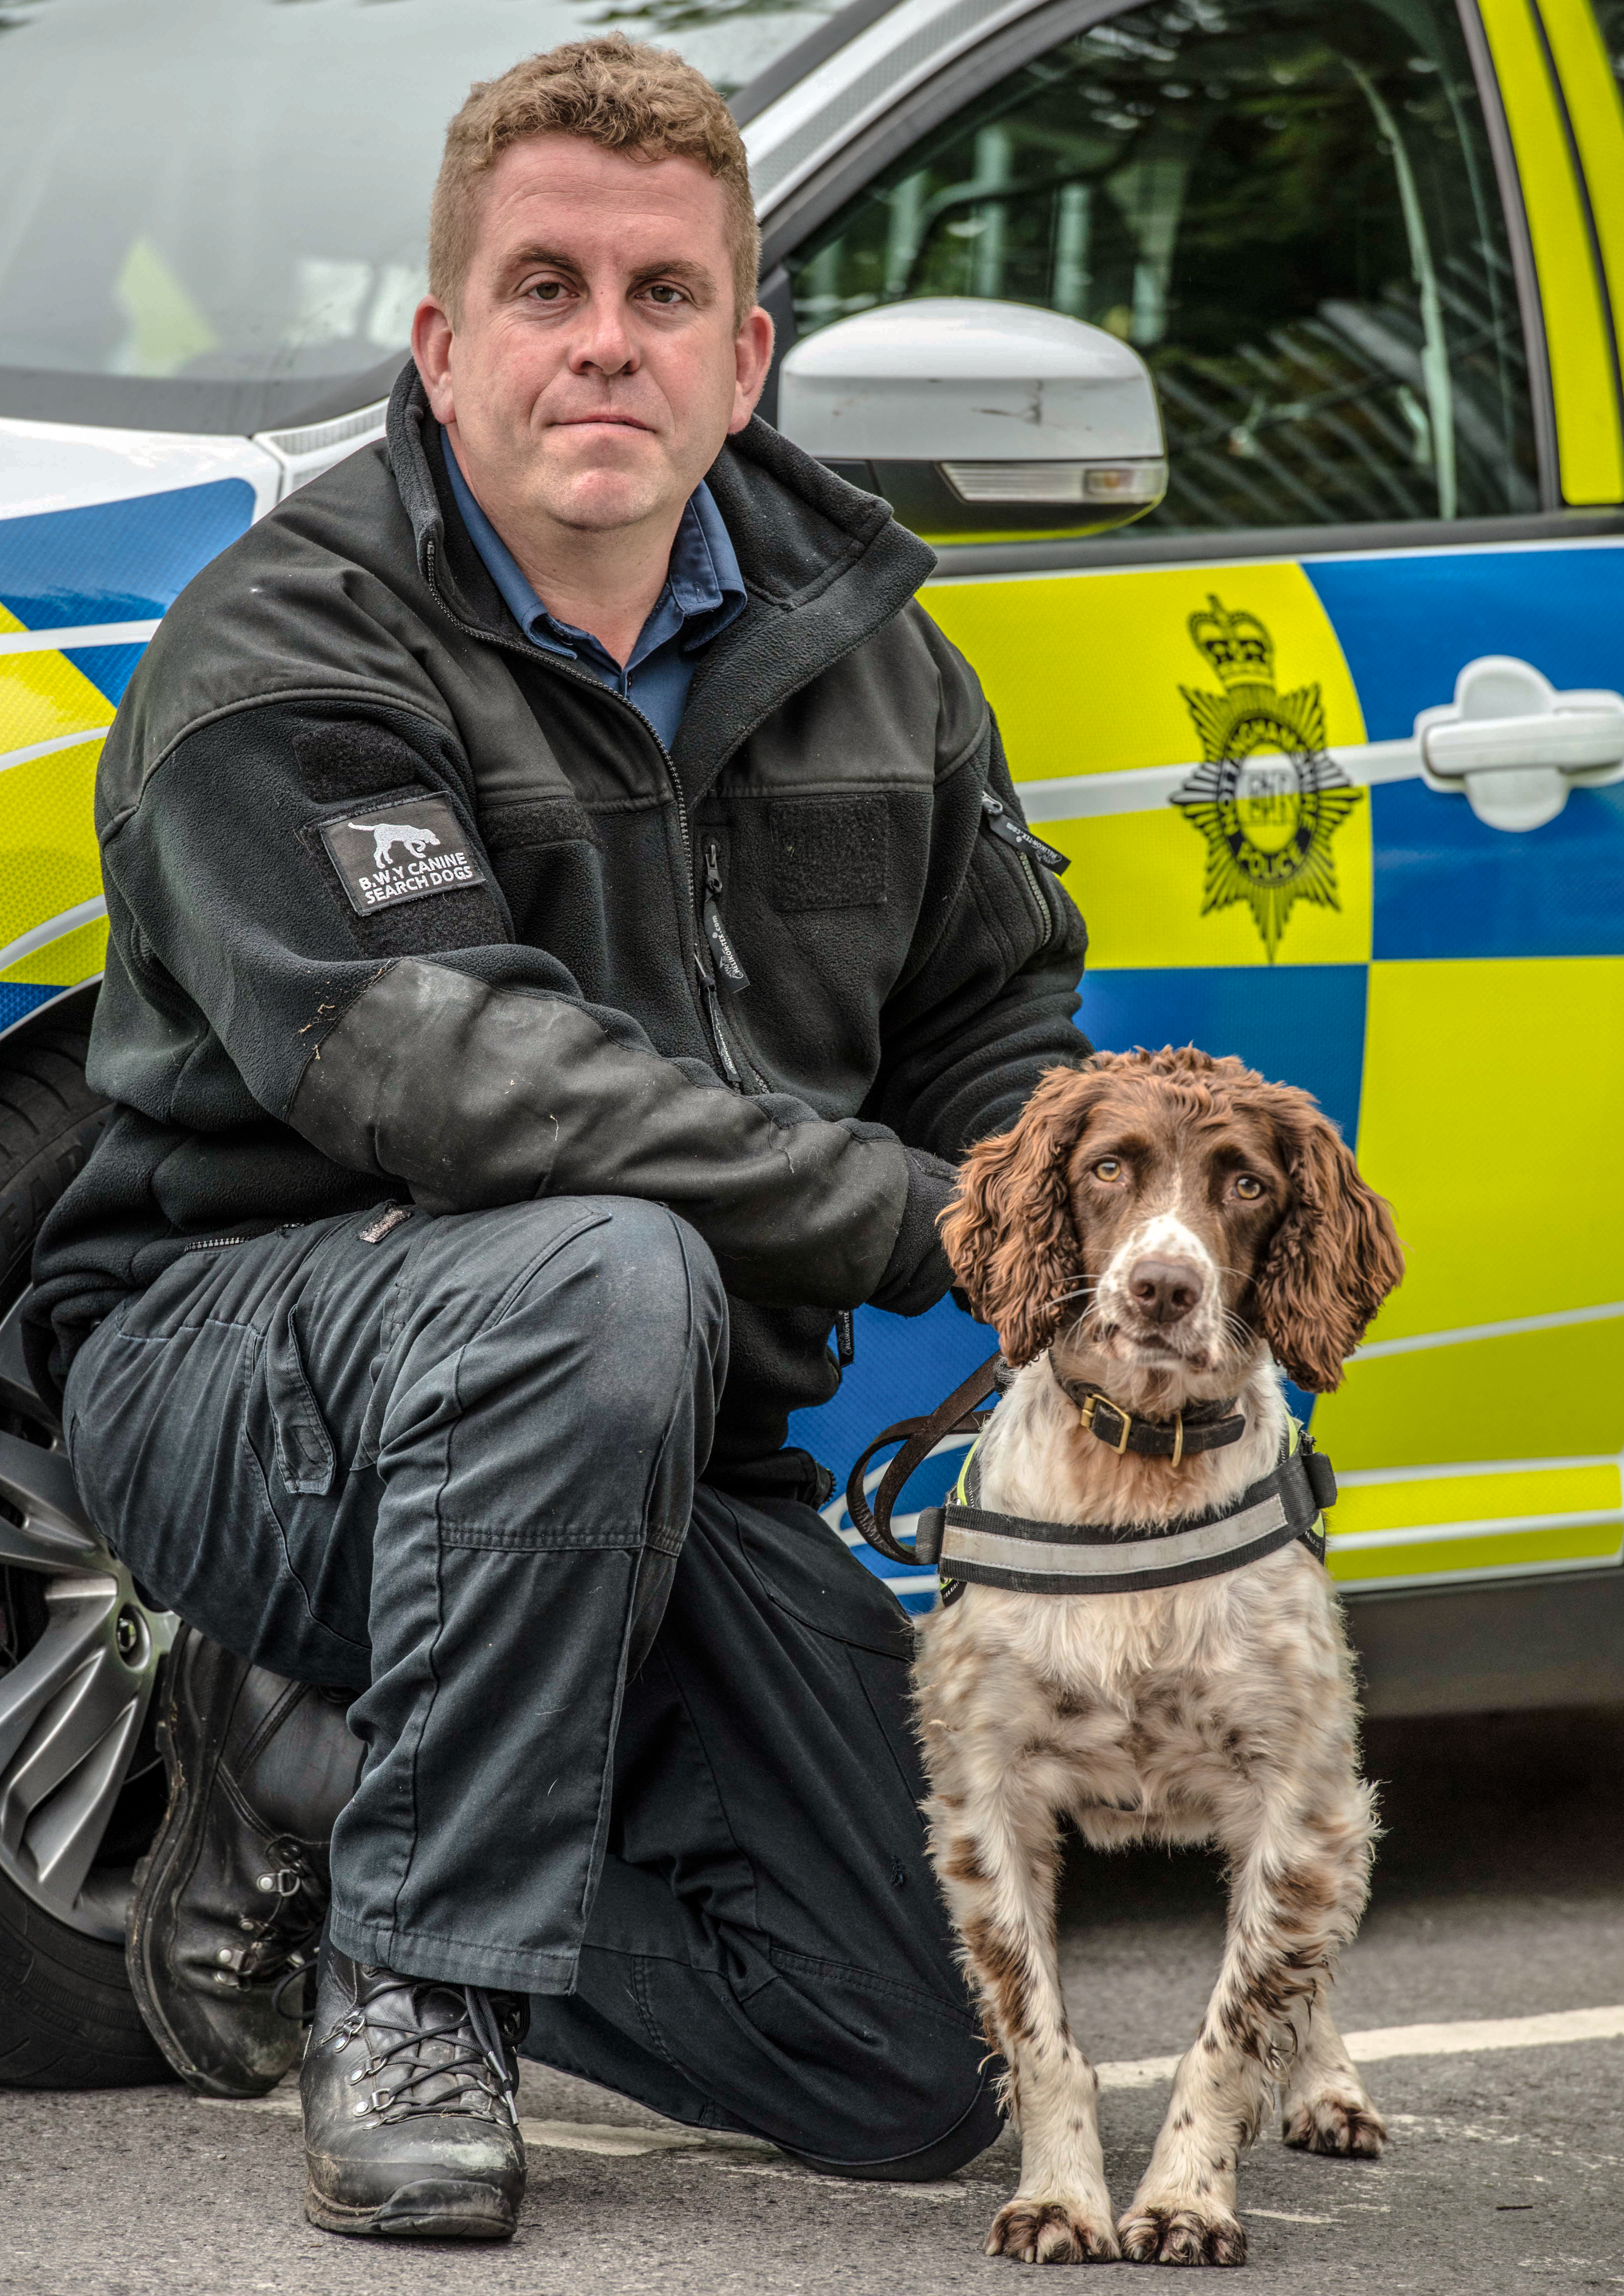 Stuart Phillips and Scamp the sniffer dog in front of a police car.